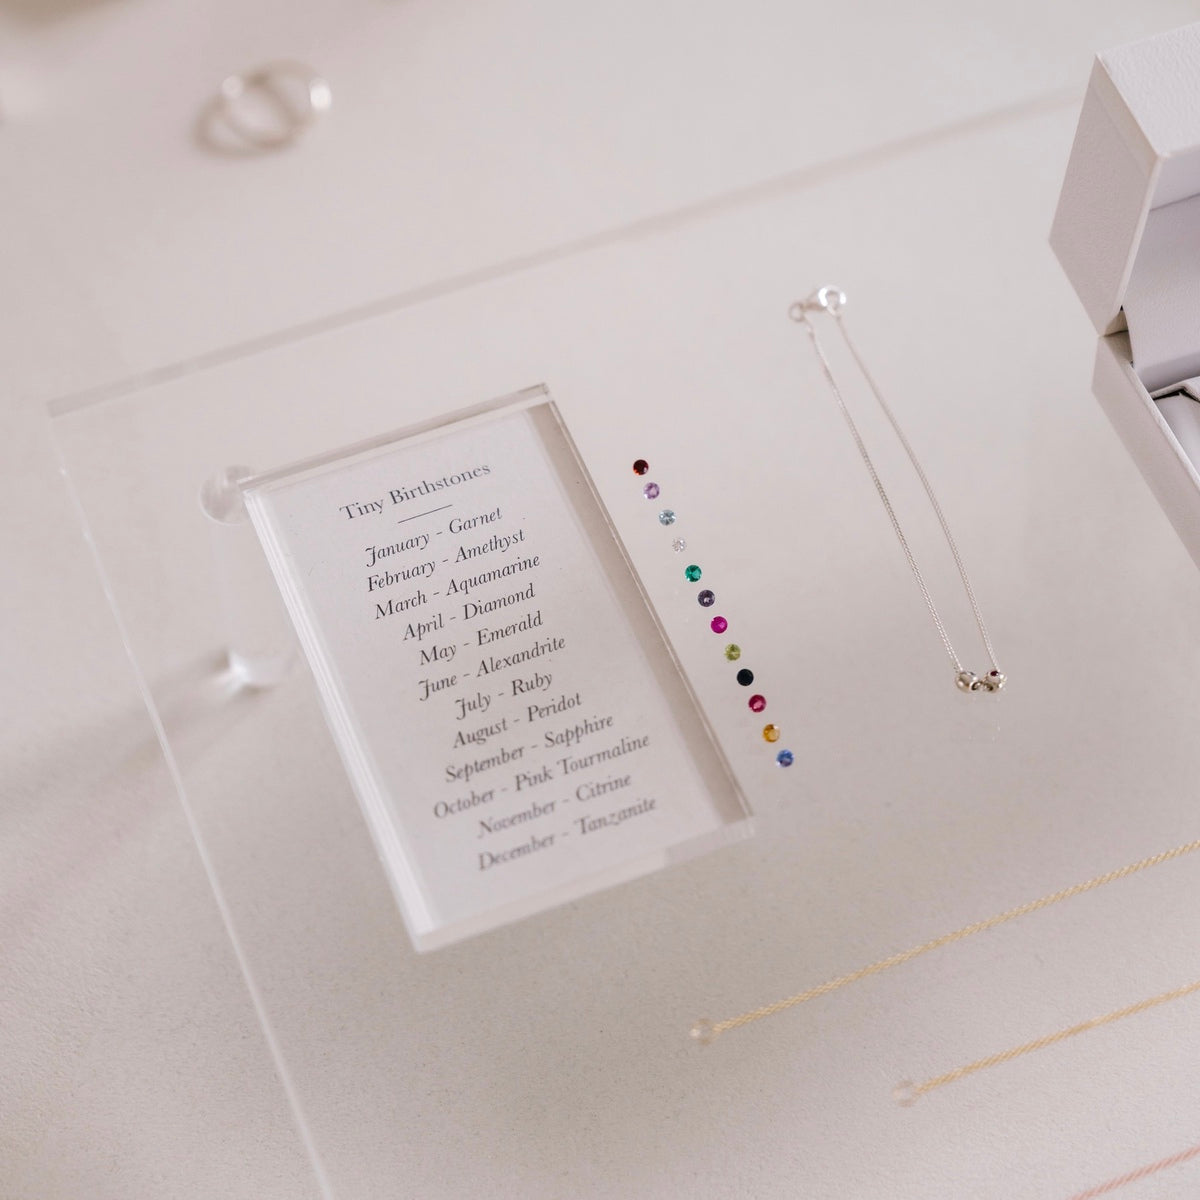 A selection of our 12 birthstones to pick from to personalise our birthstone necklace